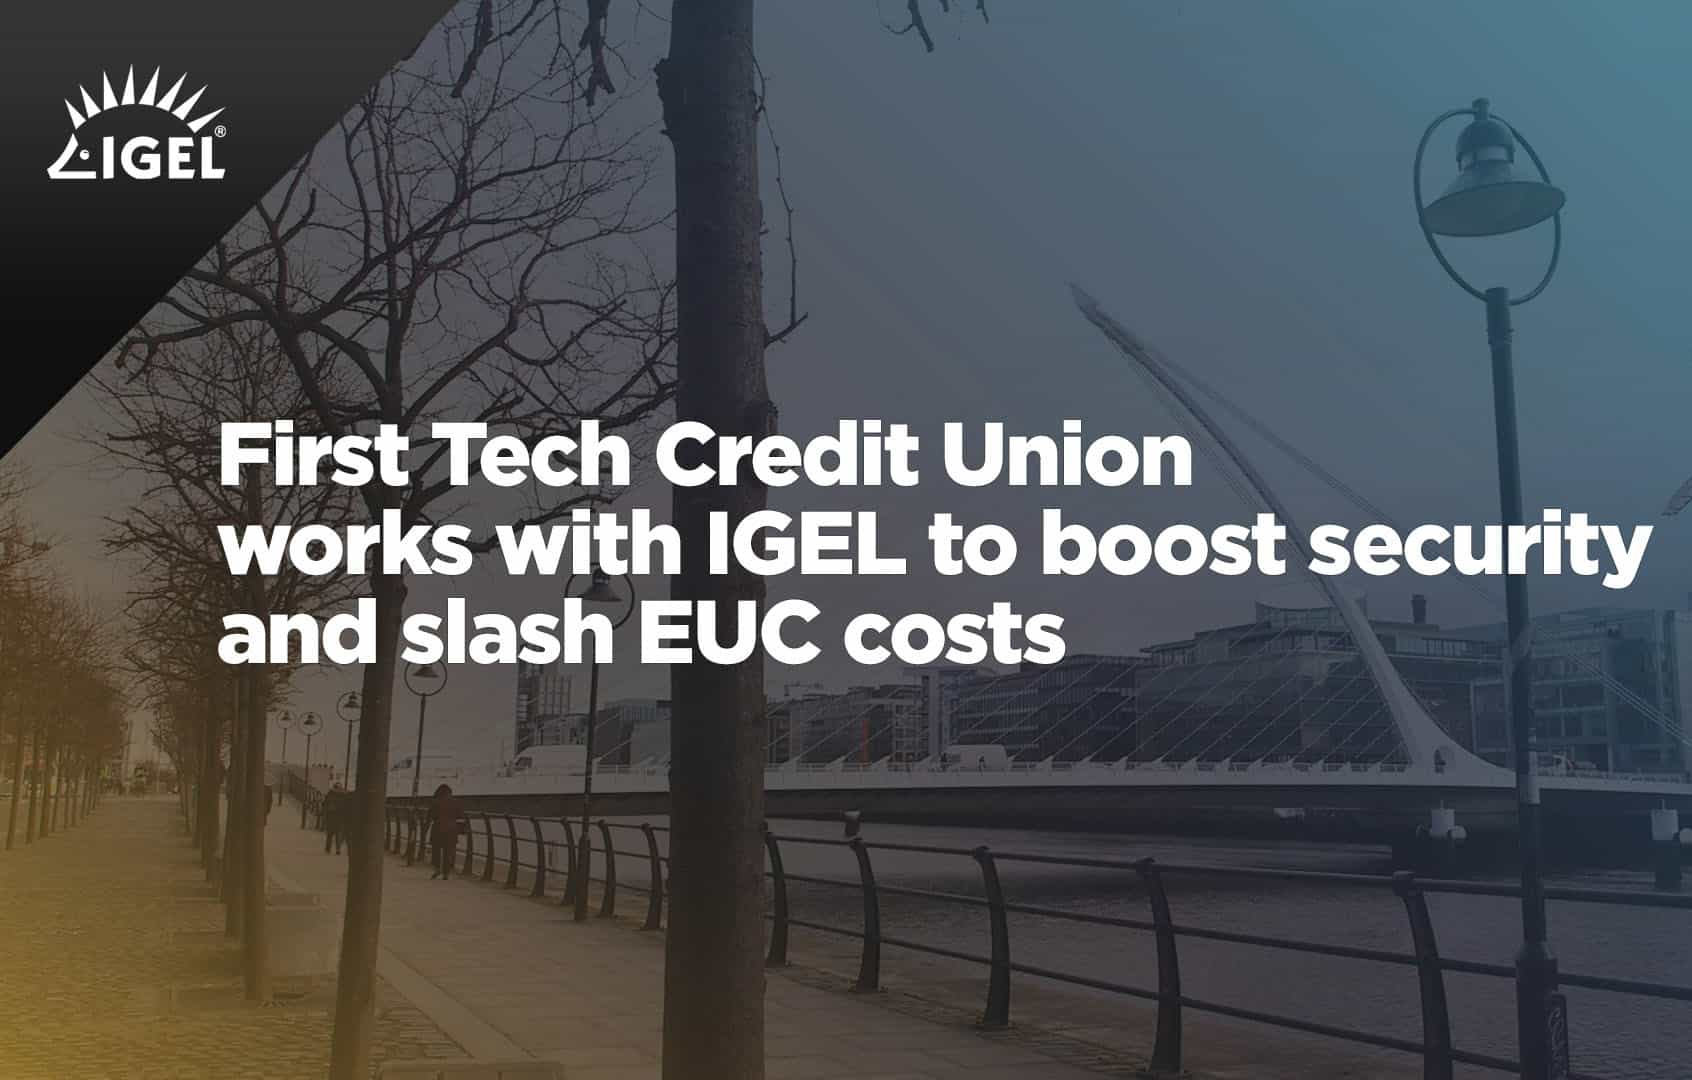 First Tech Credit Union works with IGEL to boost security and slash EUC costs